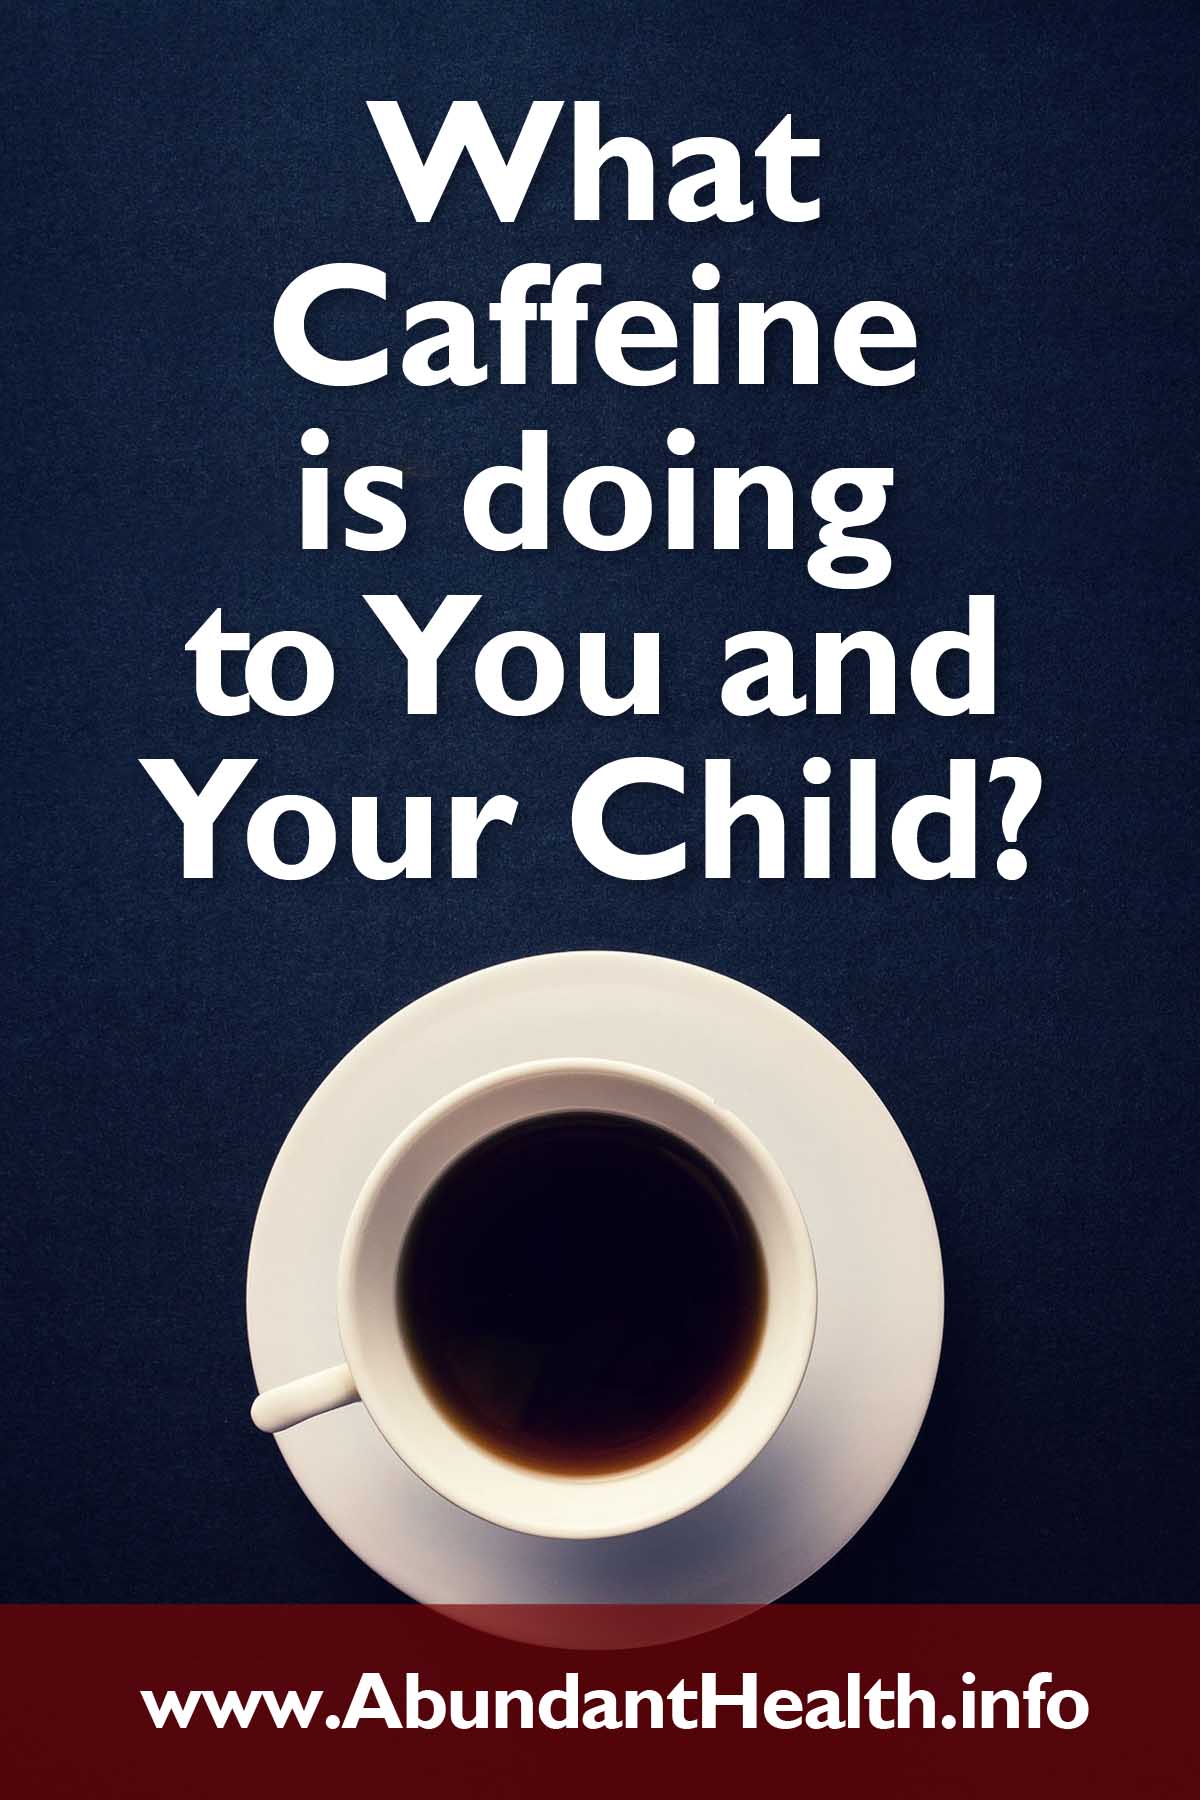 What Caffeine is doing to You and Your Child?